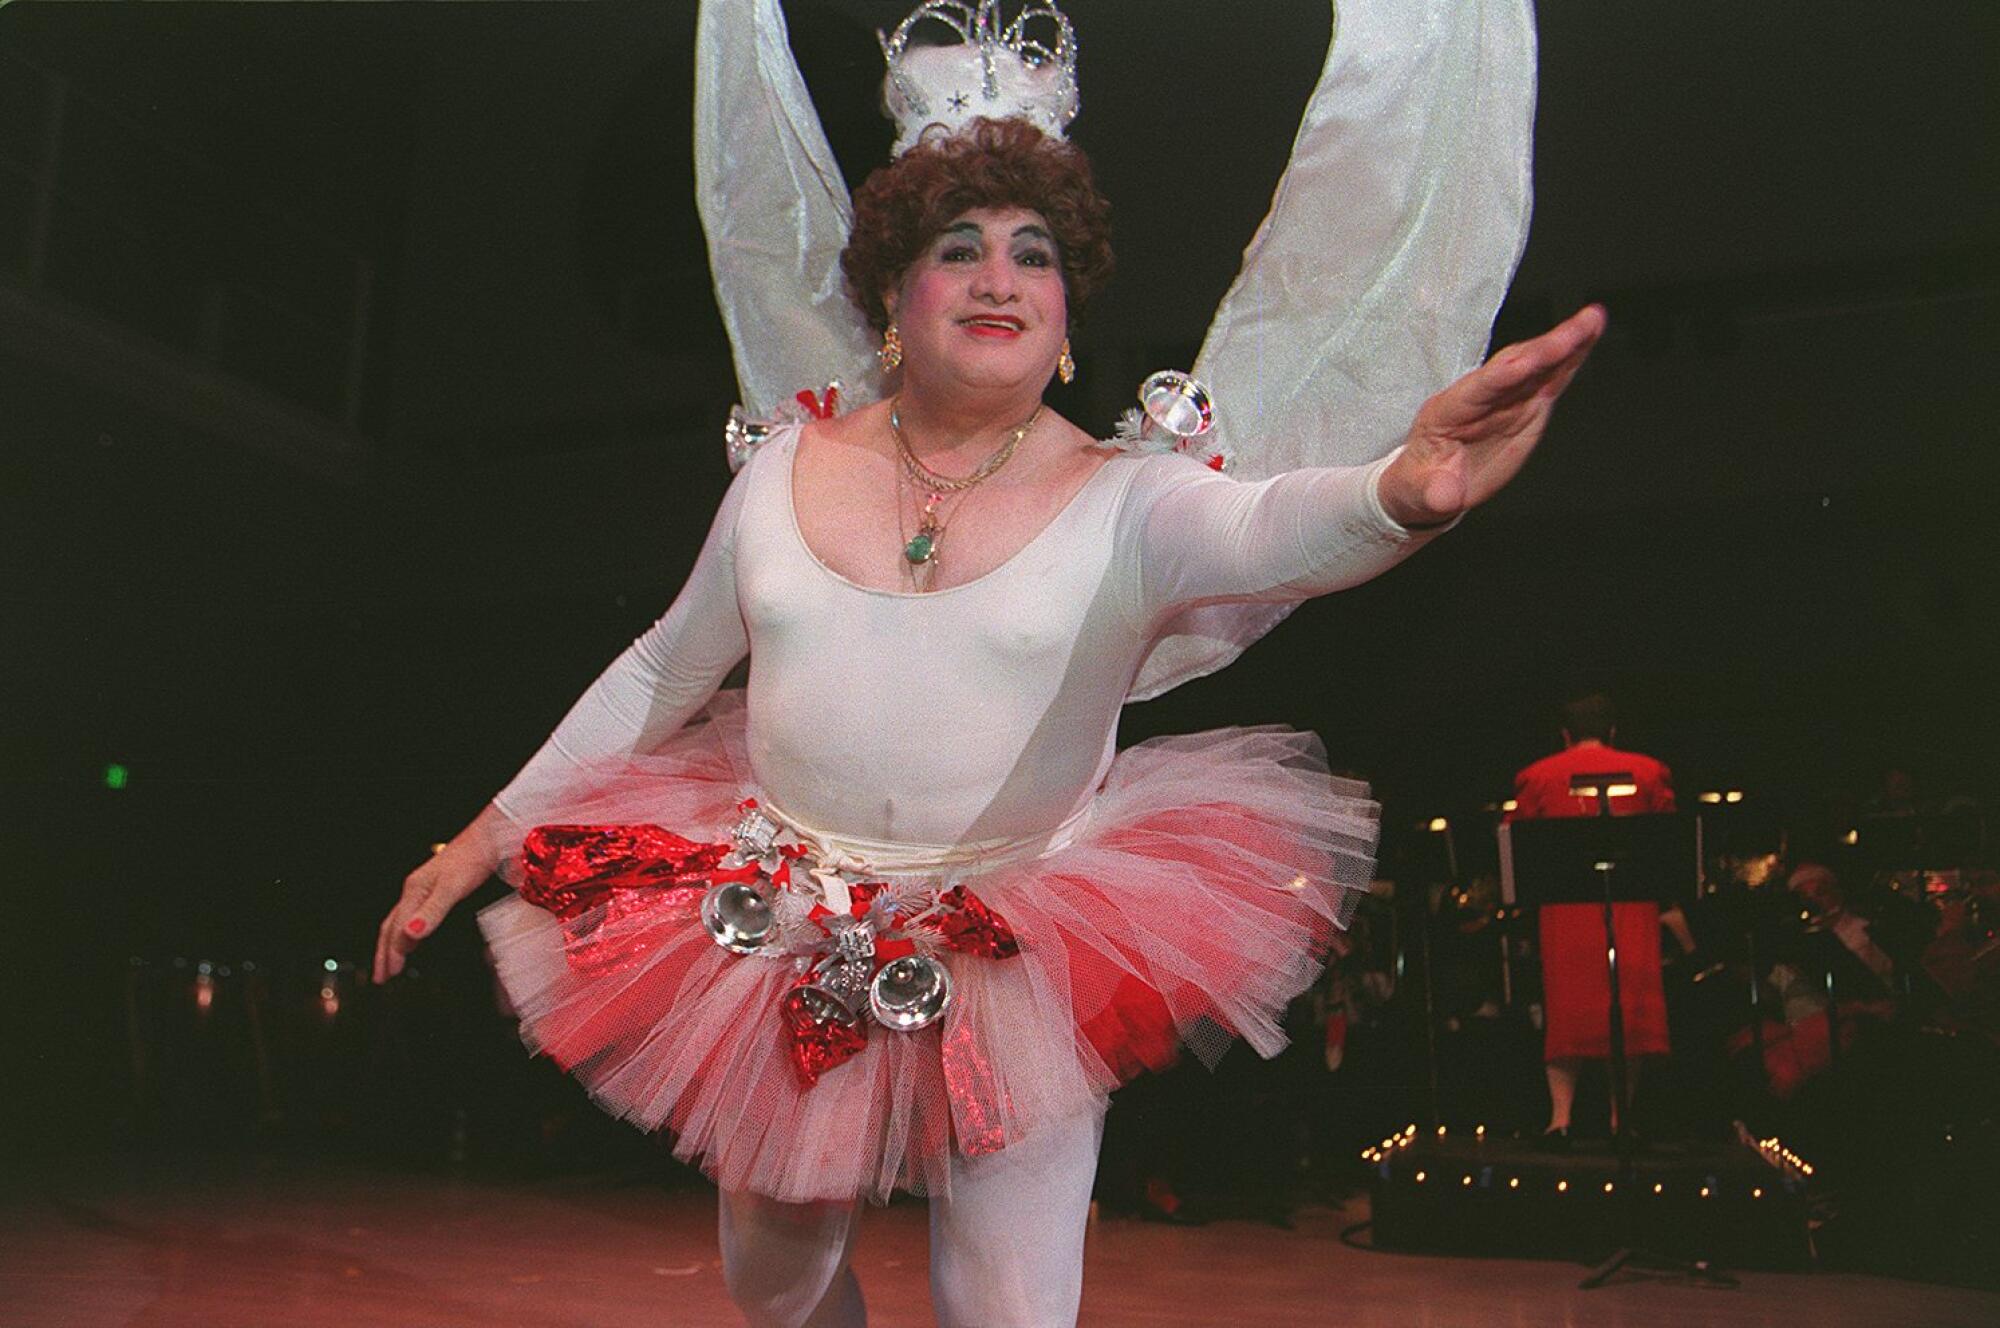 A person wears a white leotard, pink and red tutu, and crown.